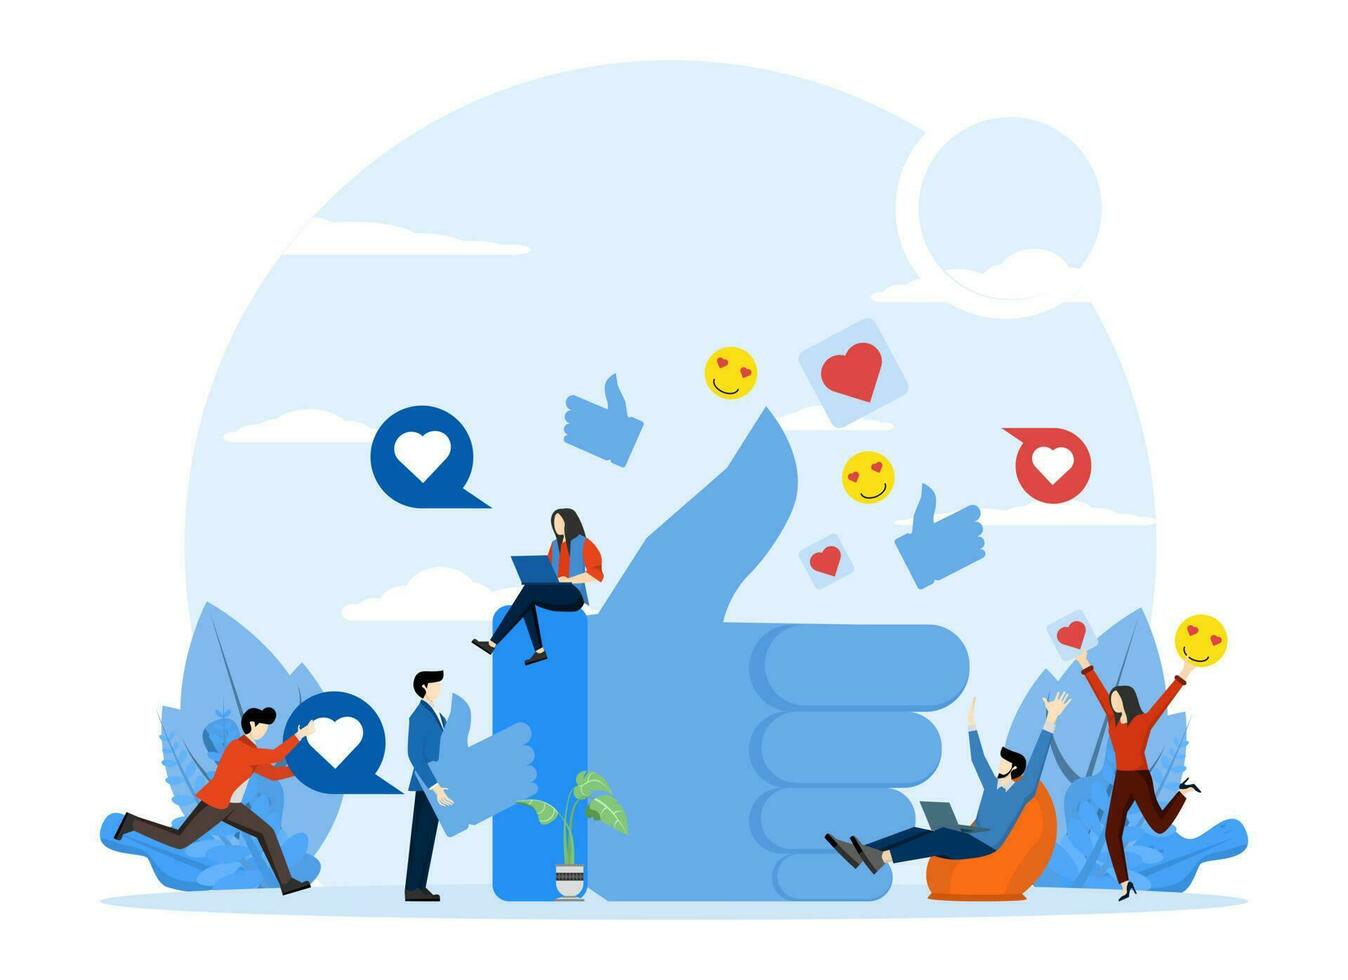 People With Social Media Icons Standing Around Big Thumb Up. Male and female followers giving likes on social media. Customer Review Rating. Internet Marketing, SMM in Business. Vector illustration.